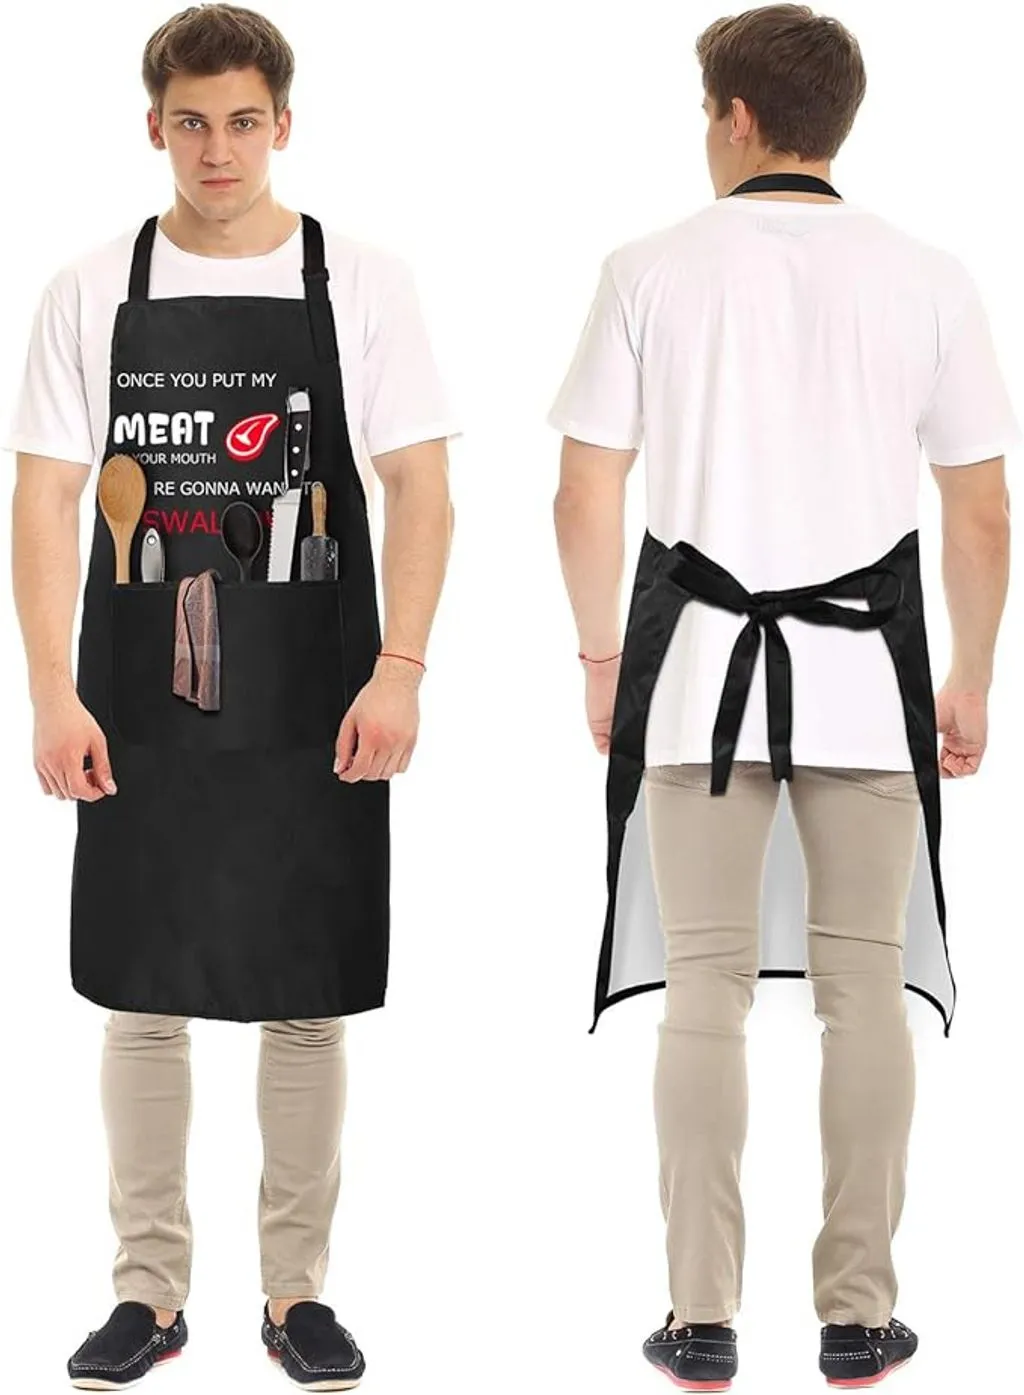 Bring humor to your grilling sessions with this custom-print funny apron, adding a touch of fun to your barbeque experience.